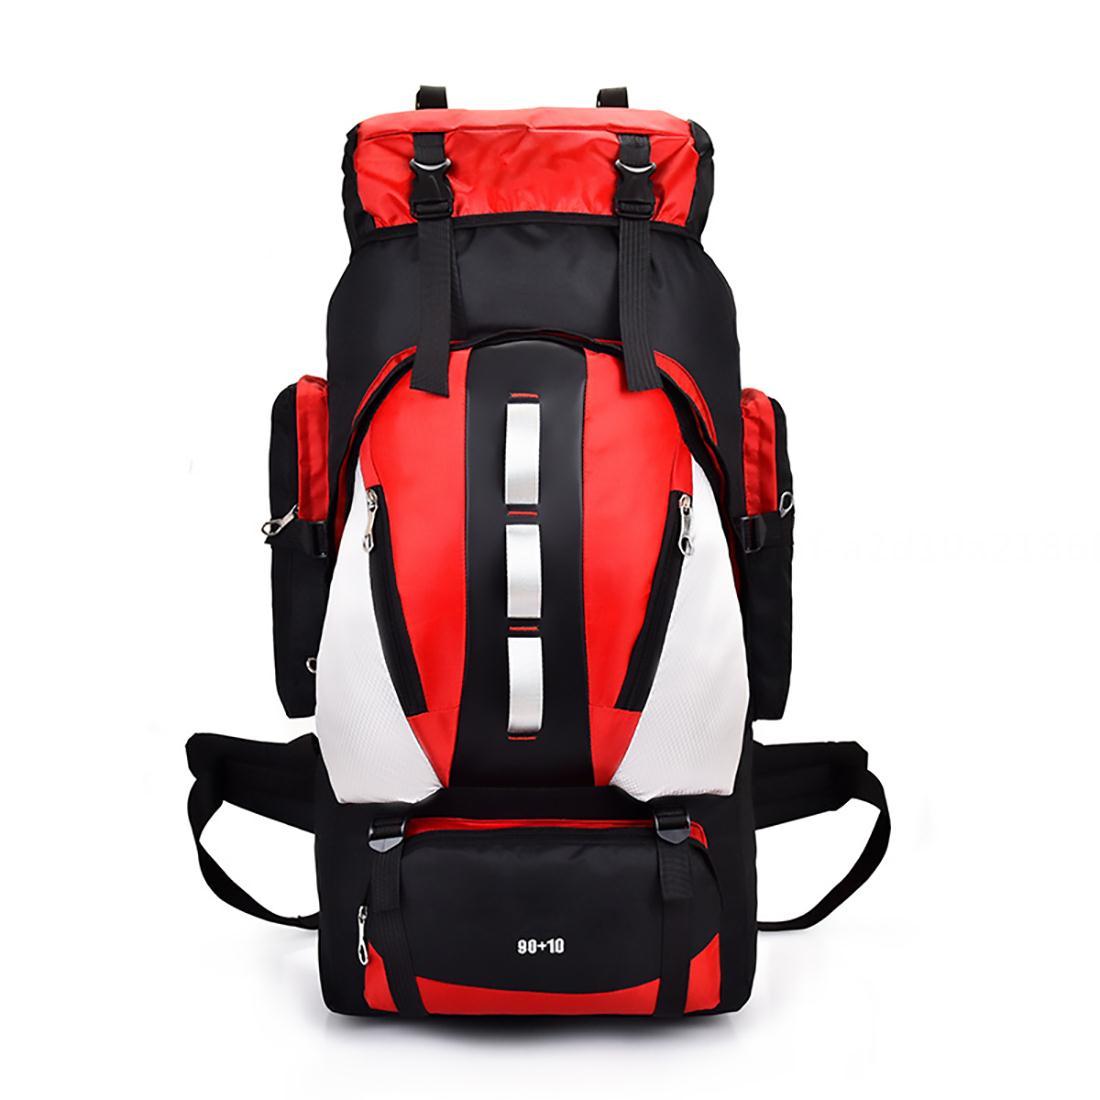 Hiking Backpack - 90L Hiking Backpack Waterproof Internal Frame Backpack Large Hiking Mountaineering Backpack, Free Rain Cover for Men and Women Outdoors.Red - image 1 of 9